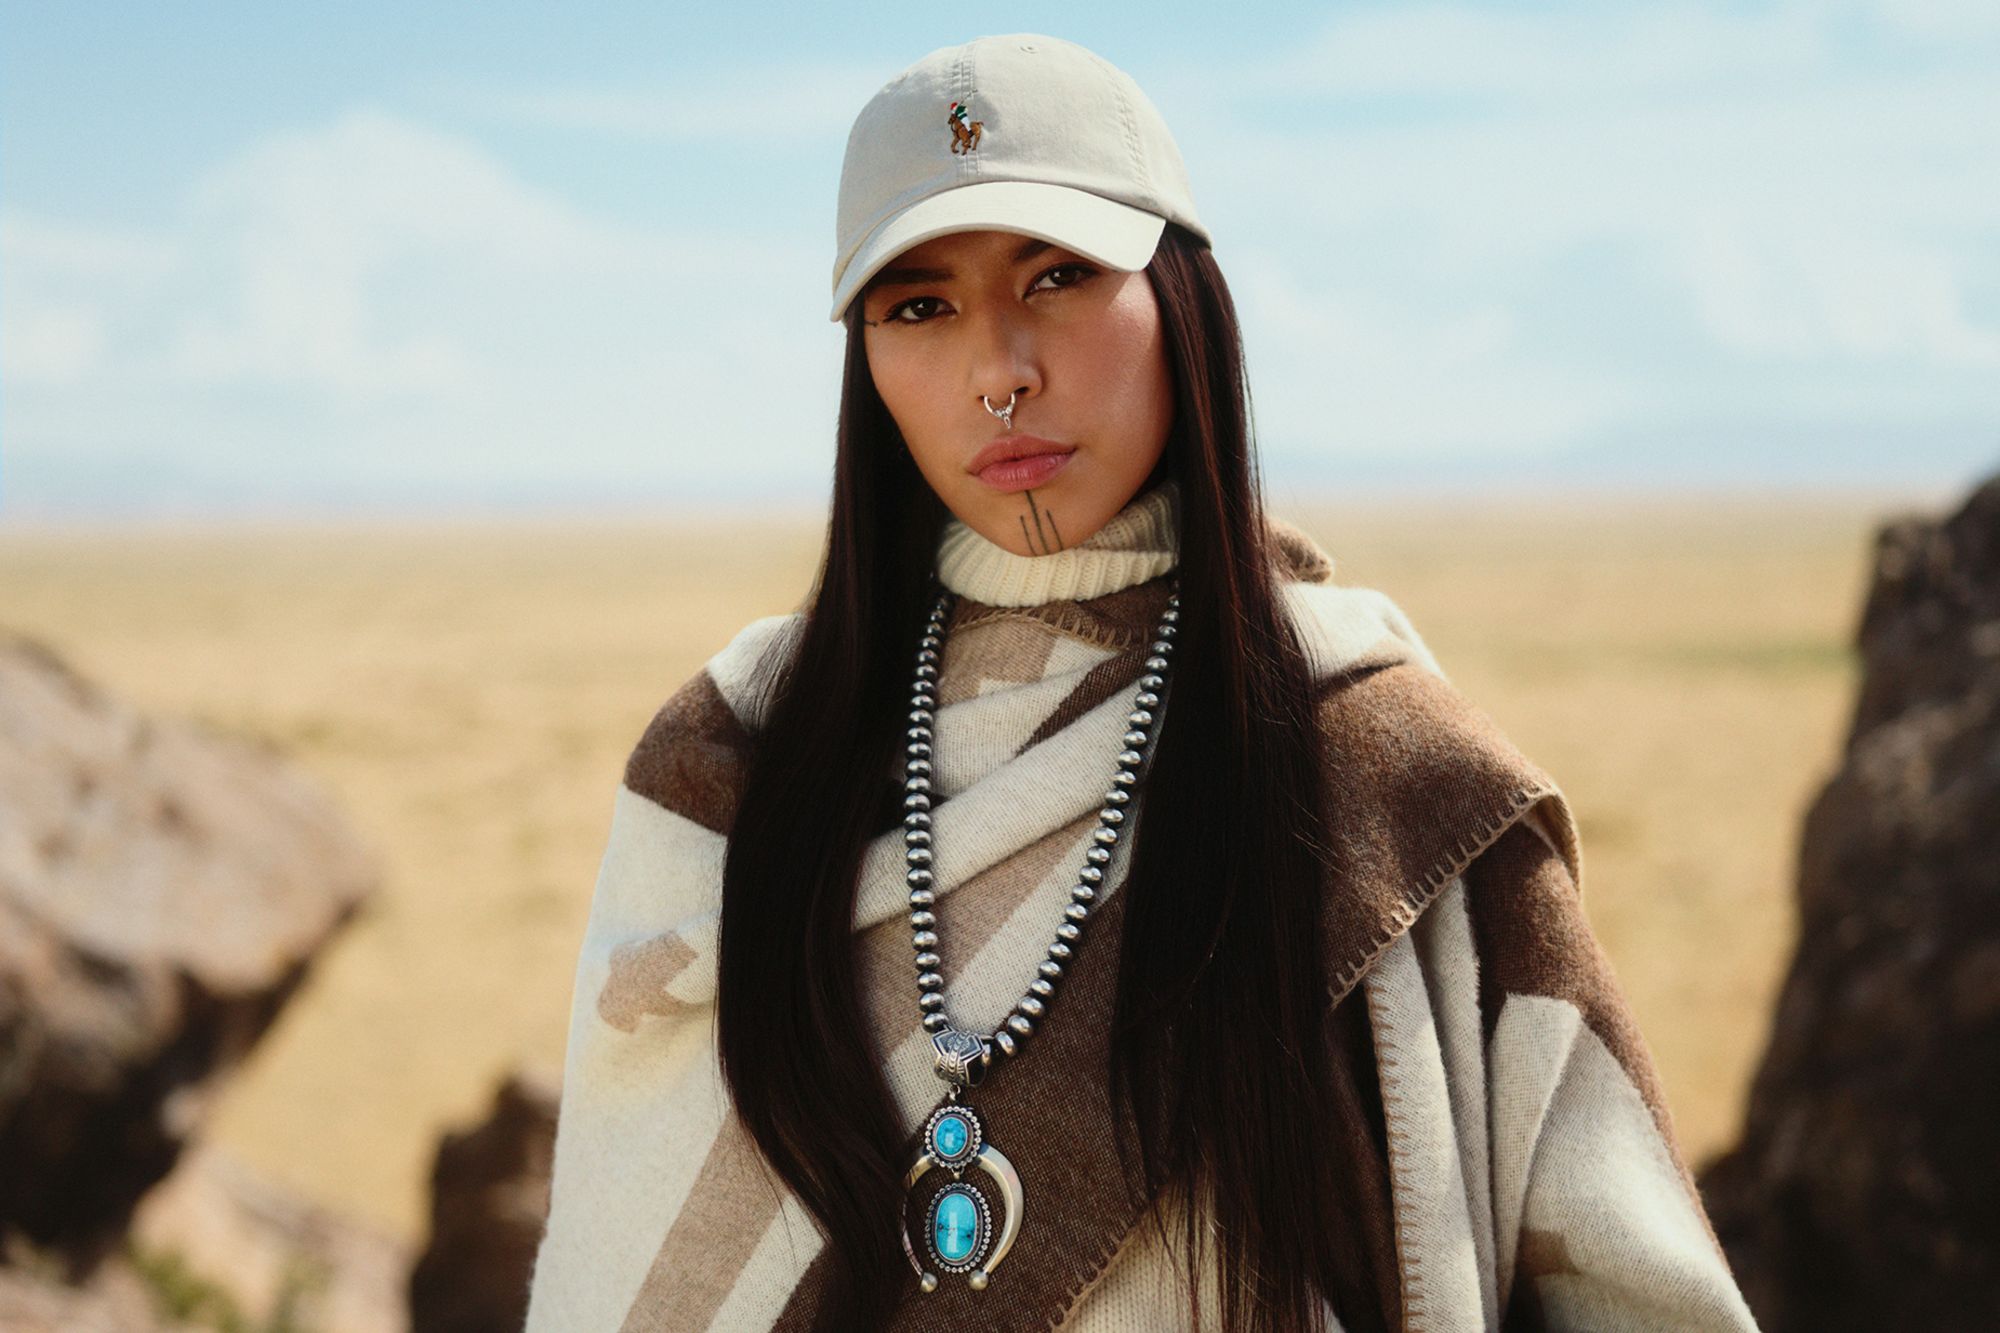 Ralph Lauren Awesome Collection Celebrates Indigenous Design!